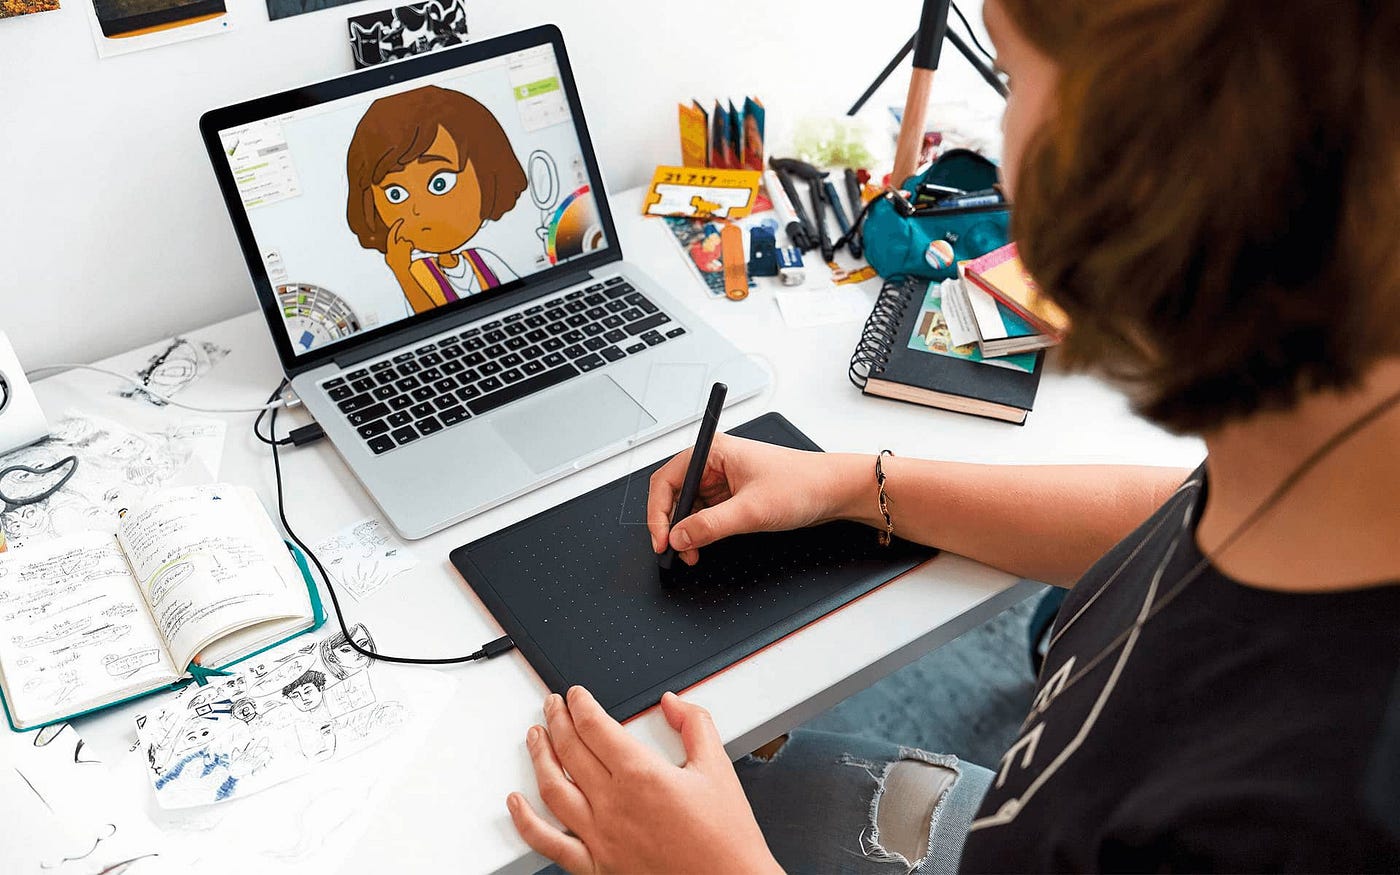 Review of the One by Wacom graphic tablet | onchrome